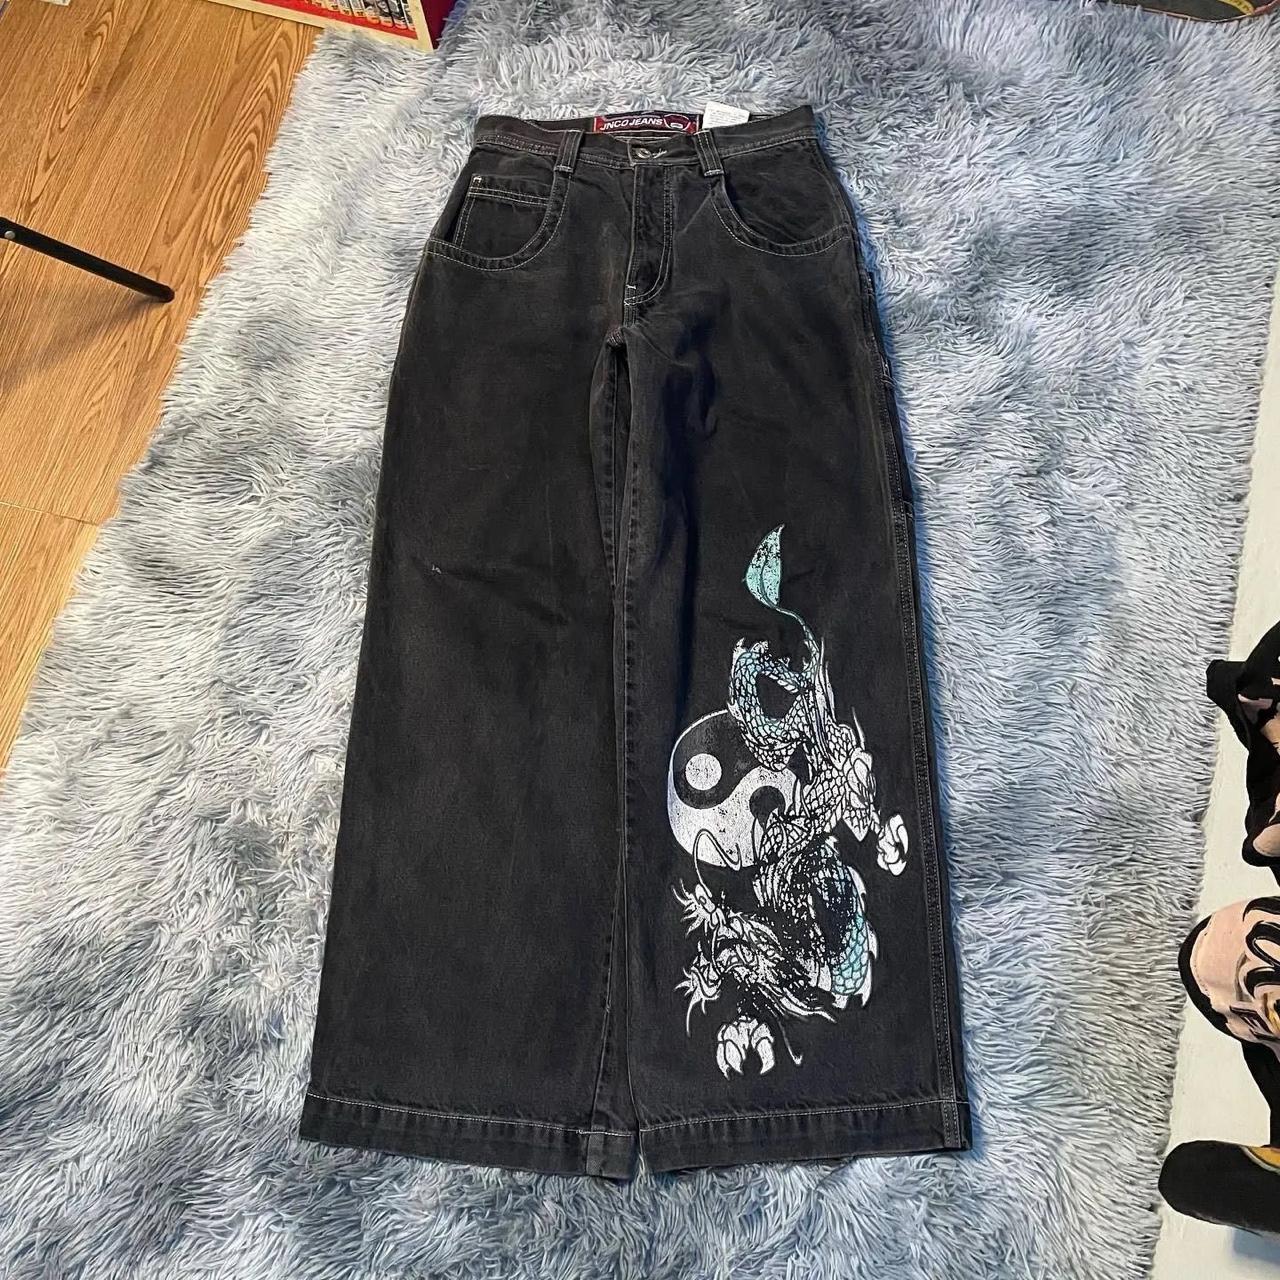 LOOKING FOR BLACK JNCOS TO TRADE 4 (THESE ARE NOT... - Depop